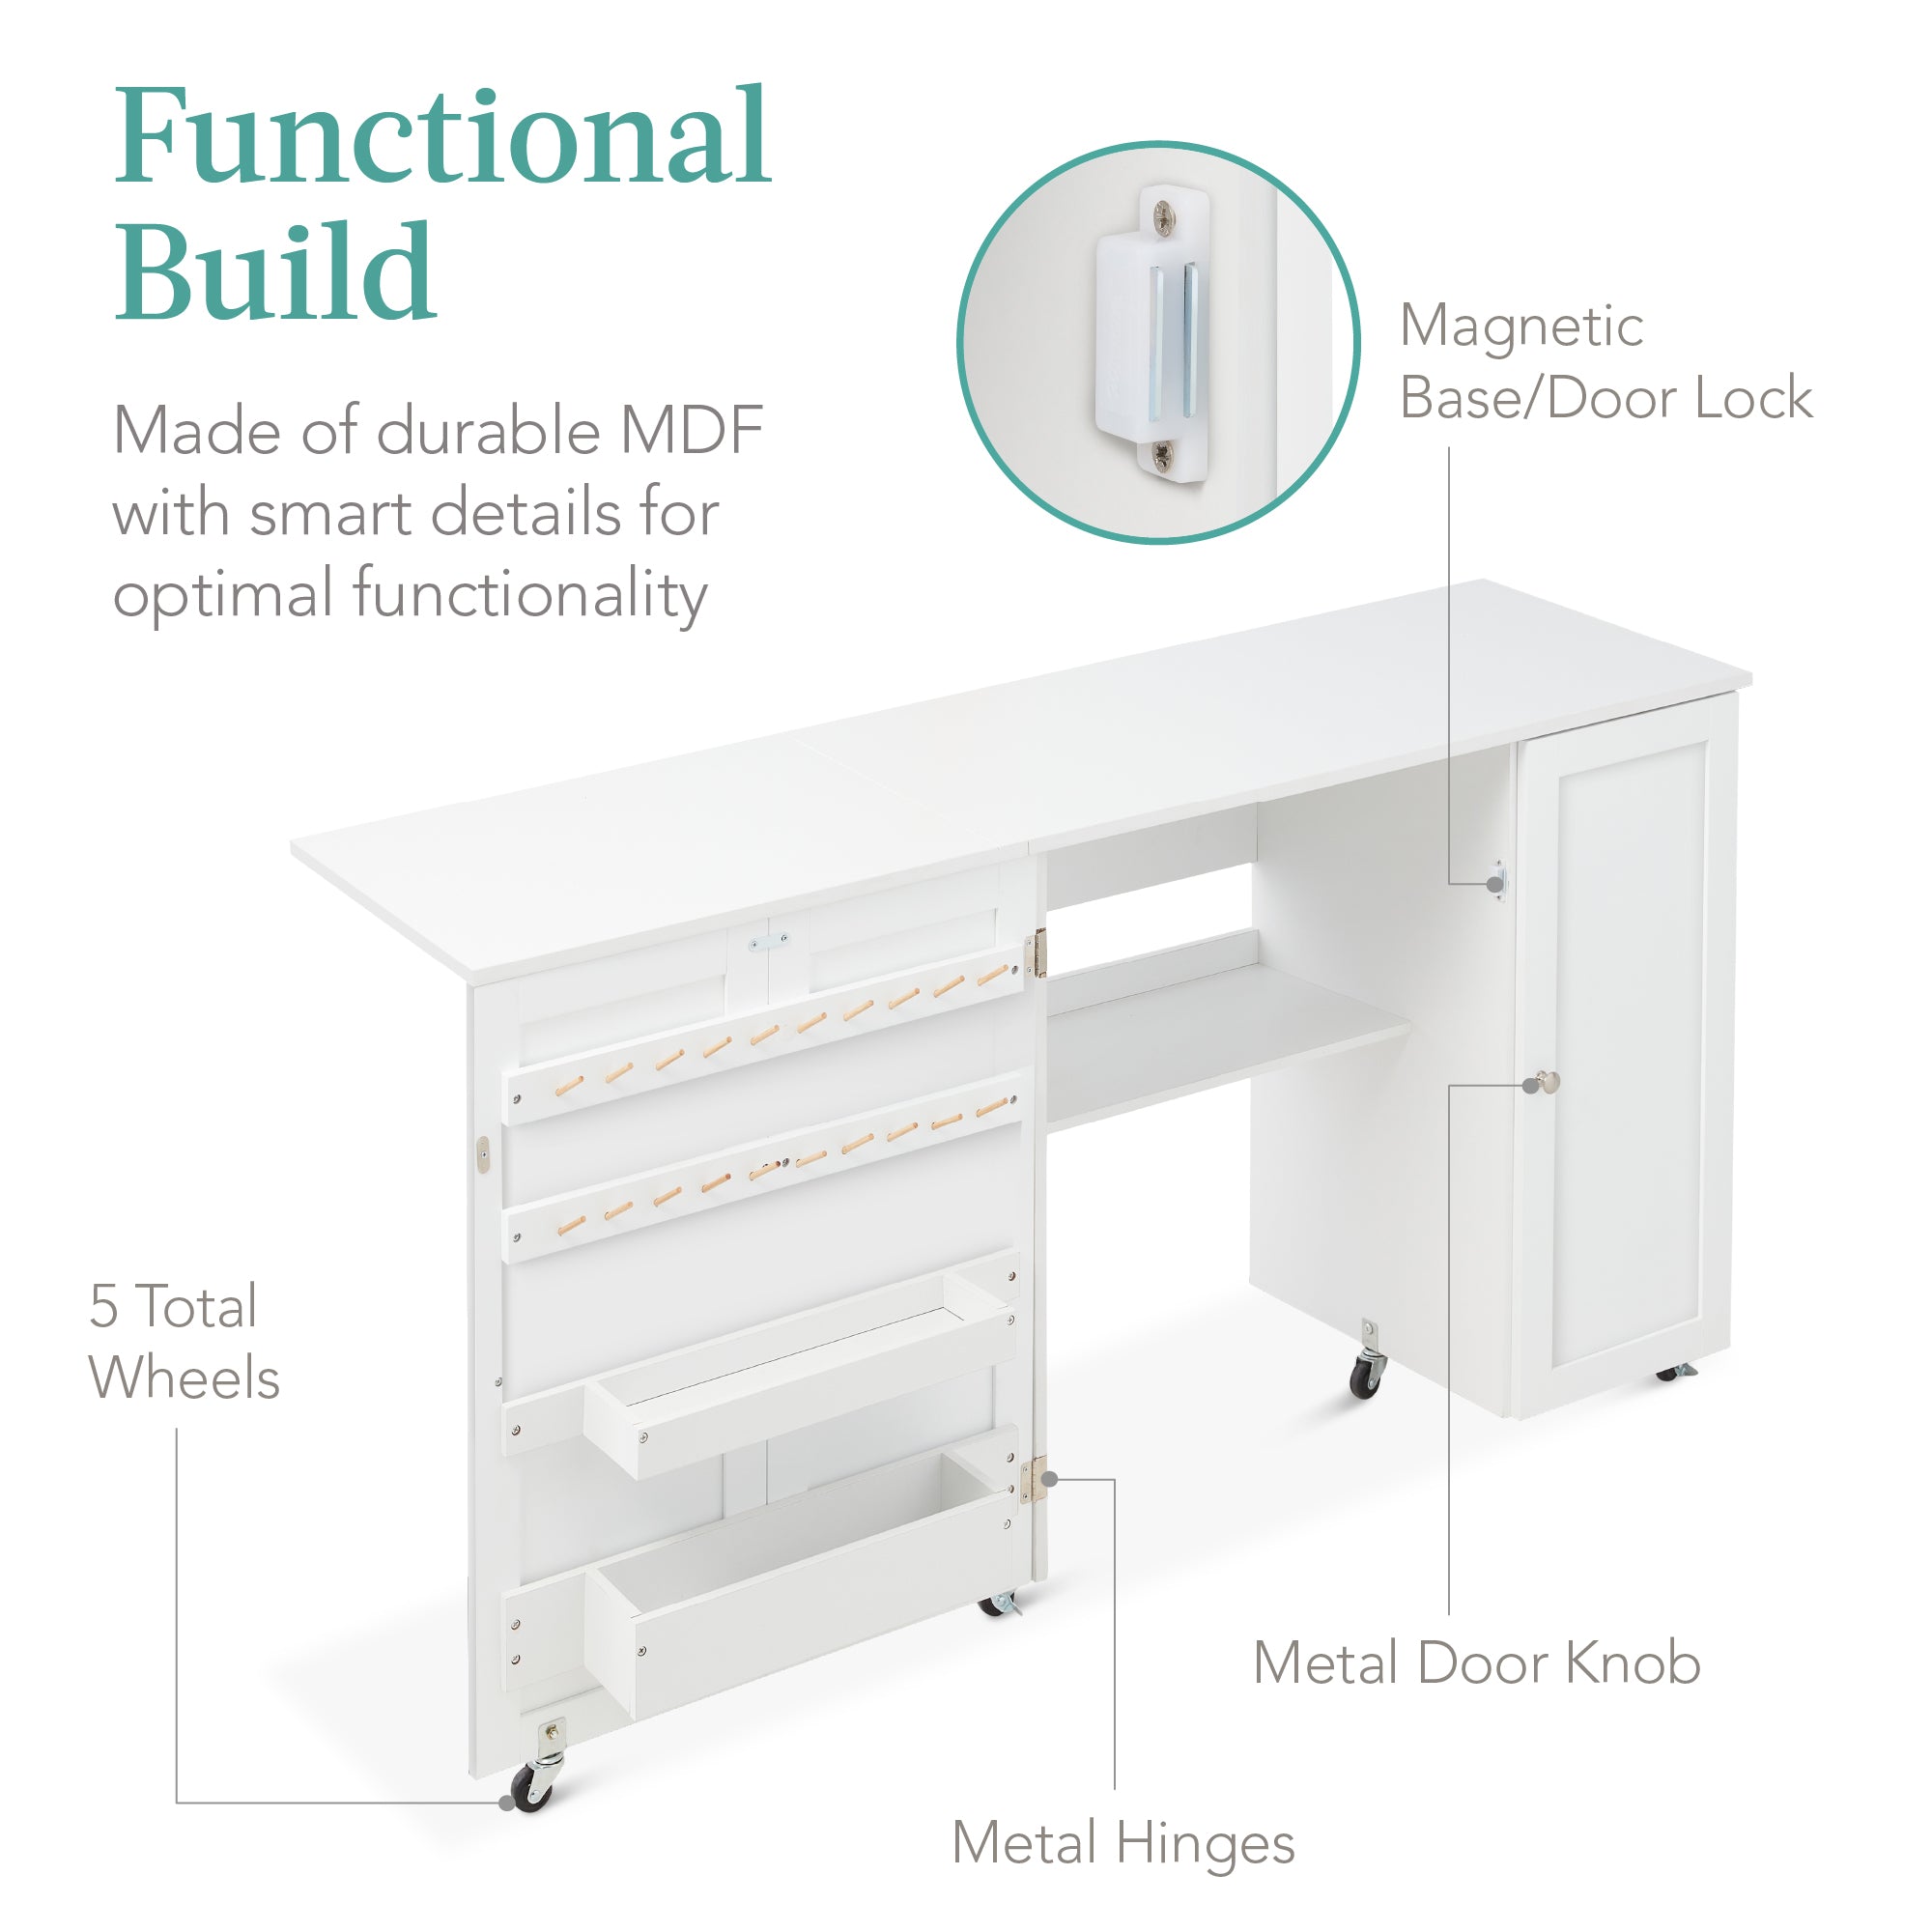 Best Choice Products Large Portable Multipurpose Folding Sewing Table w/ Magnetic Doors, Craft Storage - White